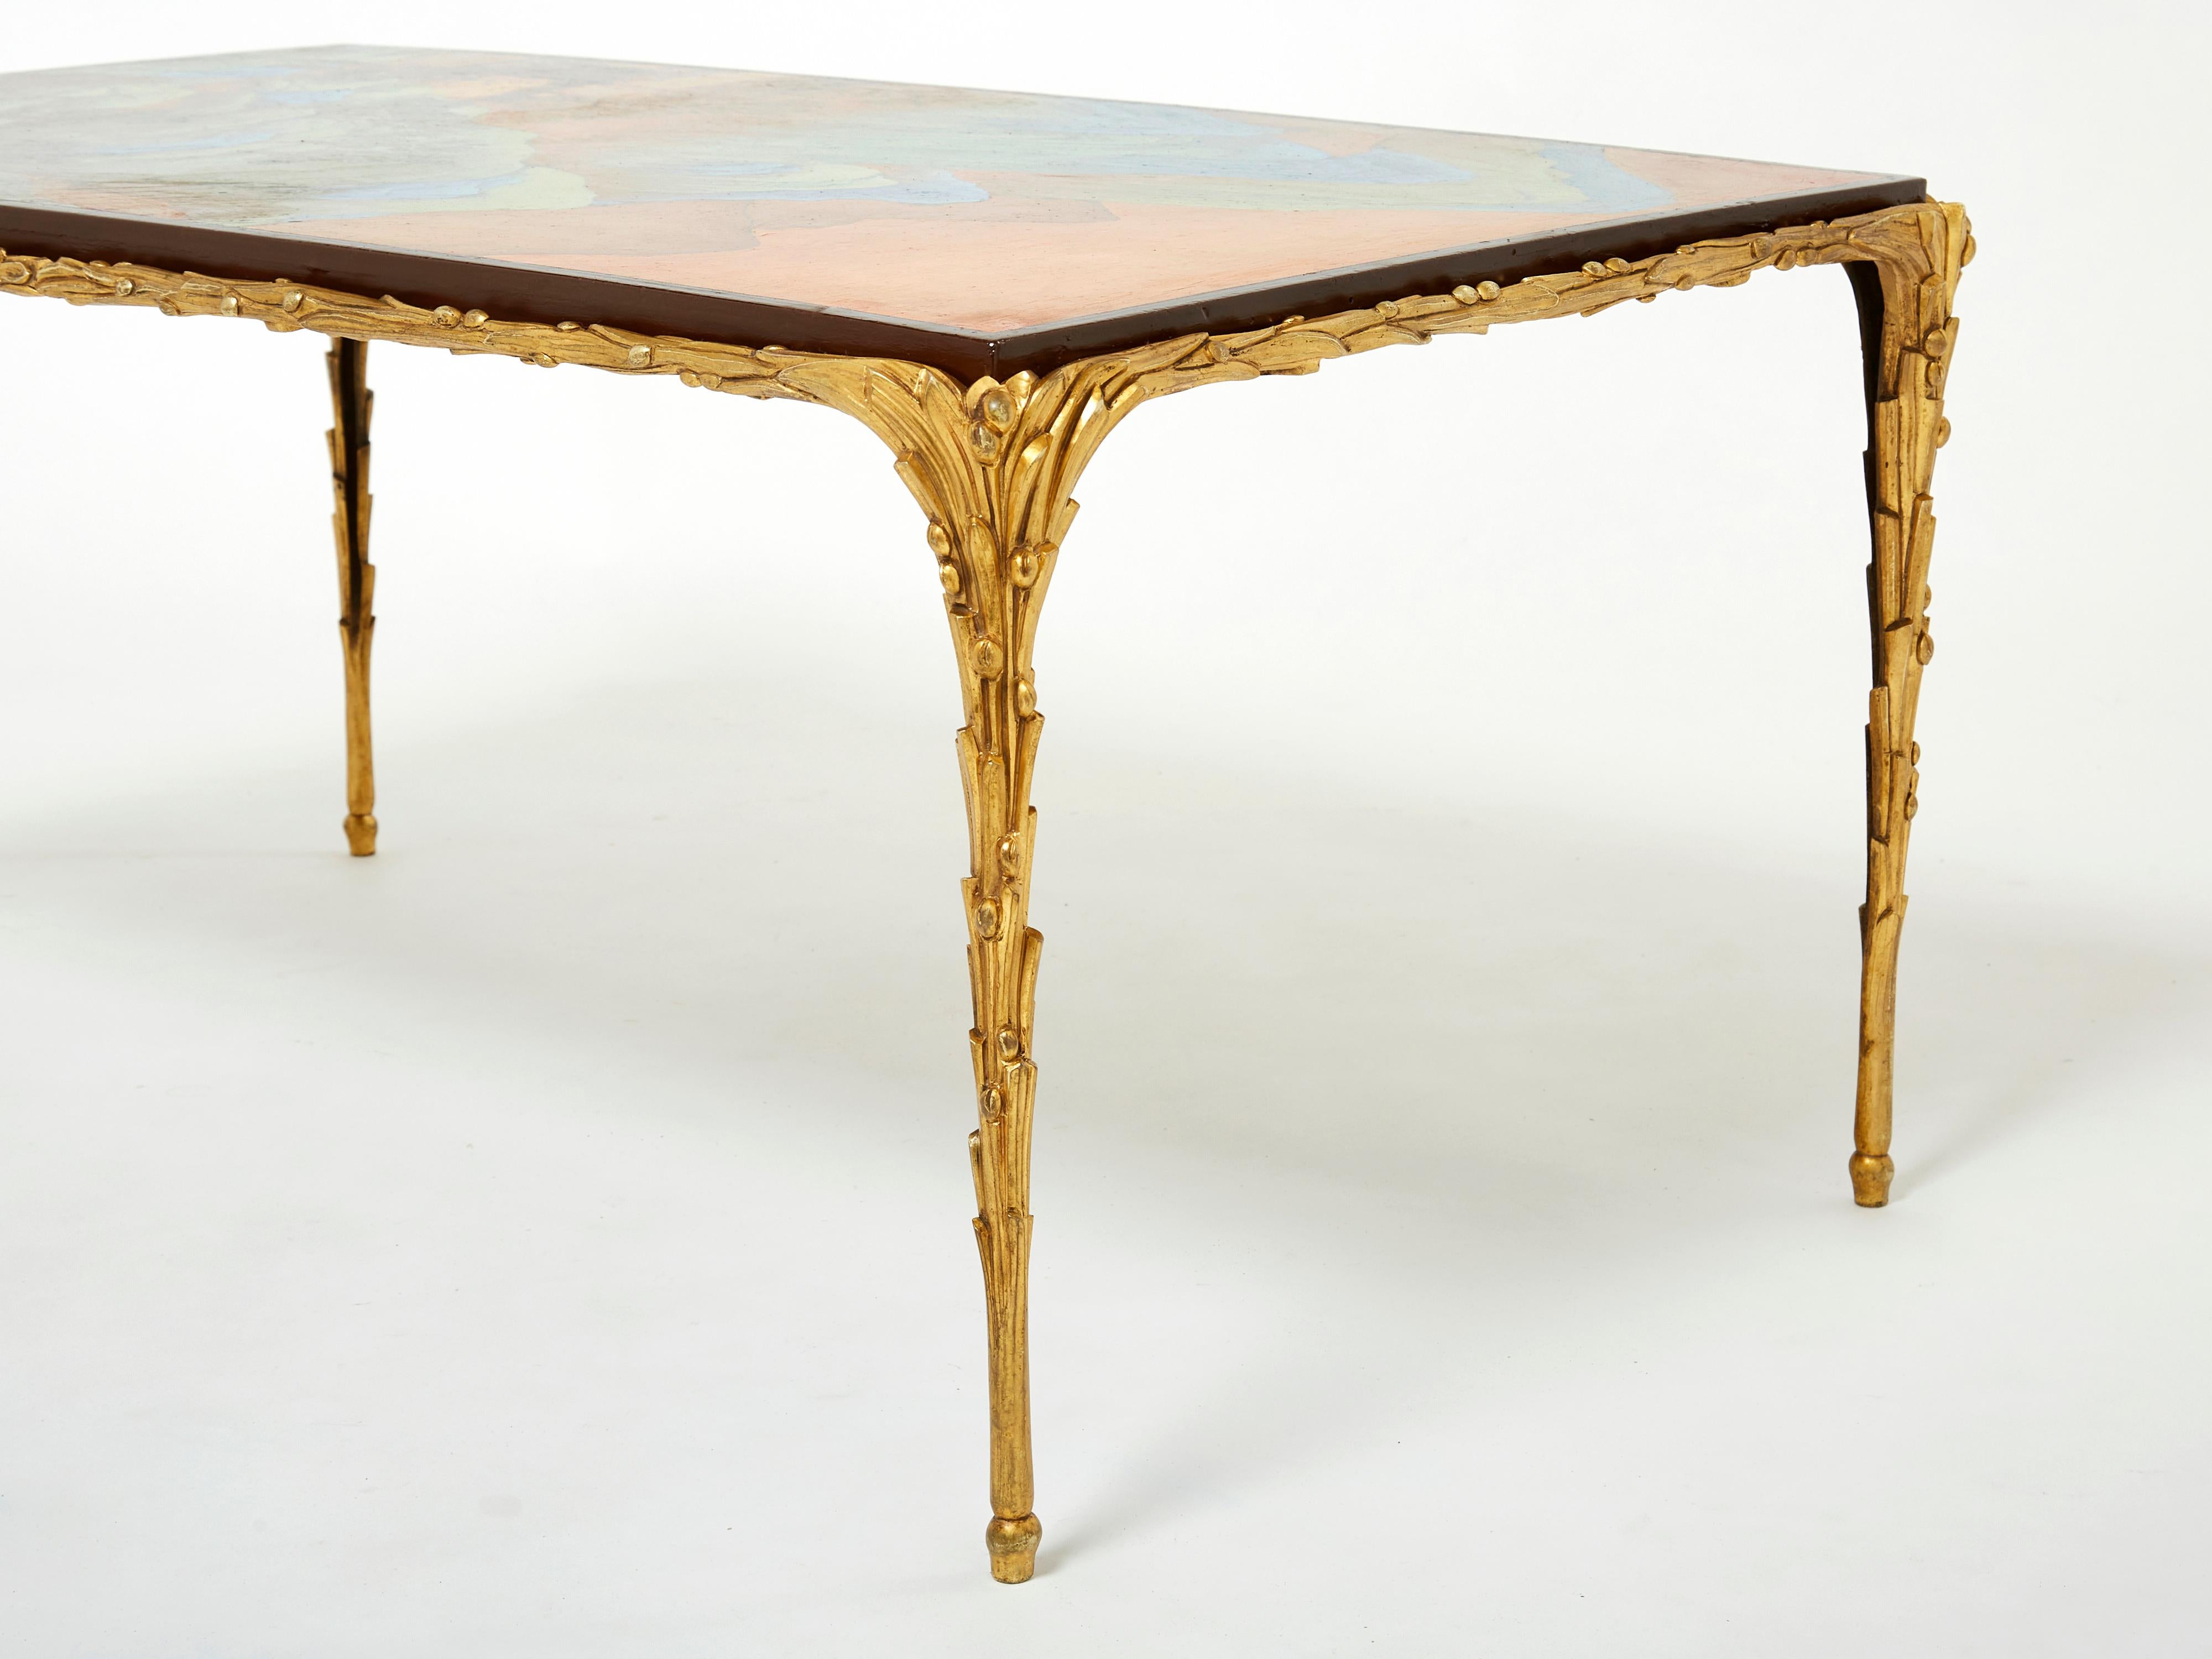 Maison Baguès foliage Bronze Chinese Lacquered Coffee Table 1960s For Sale 1